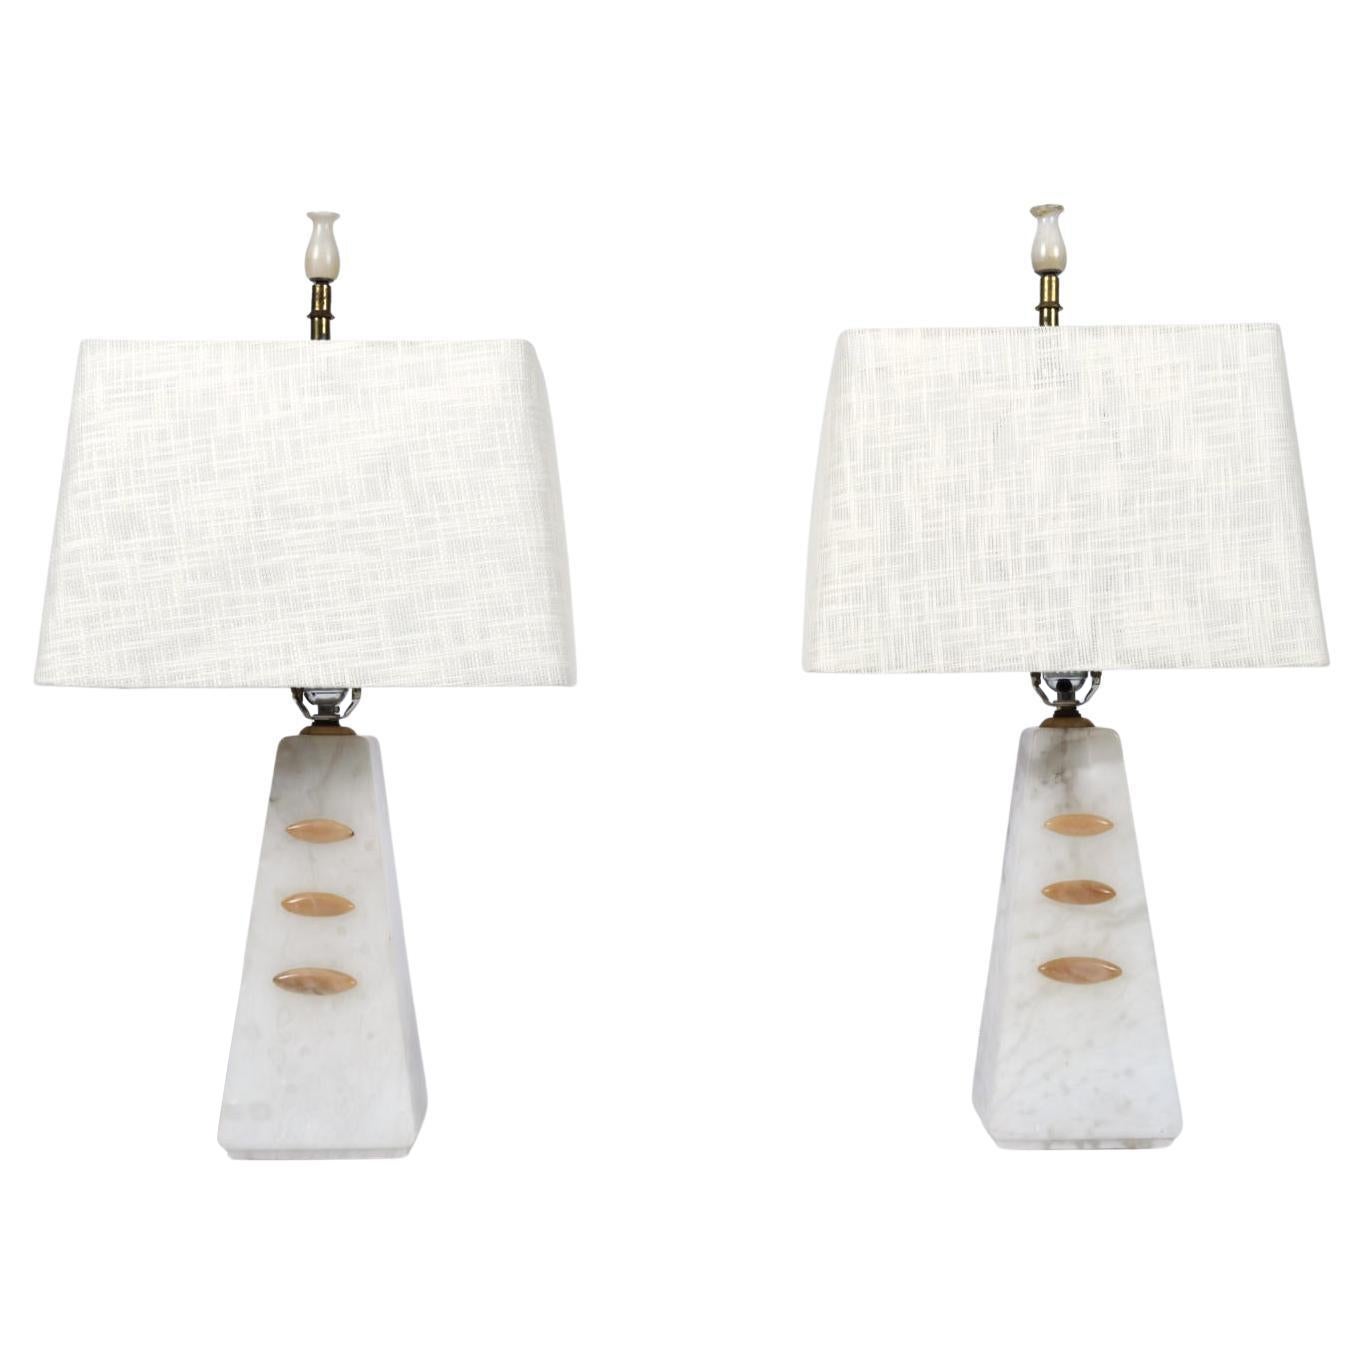 Alabaster Pyramid Table Lamps and Finials, Art Deco to Modern Transitional Style For Sale